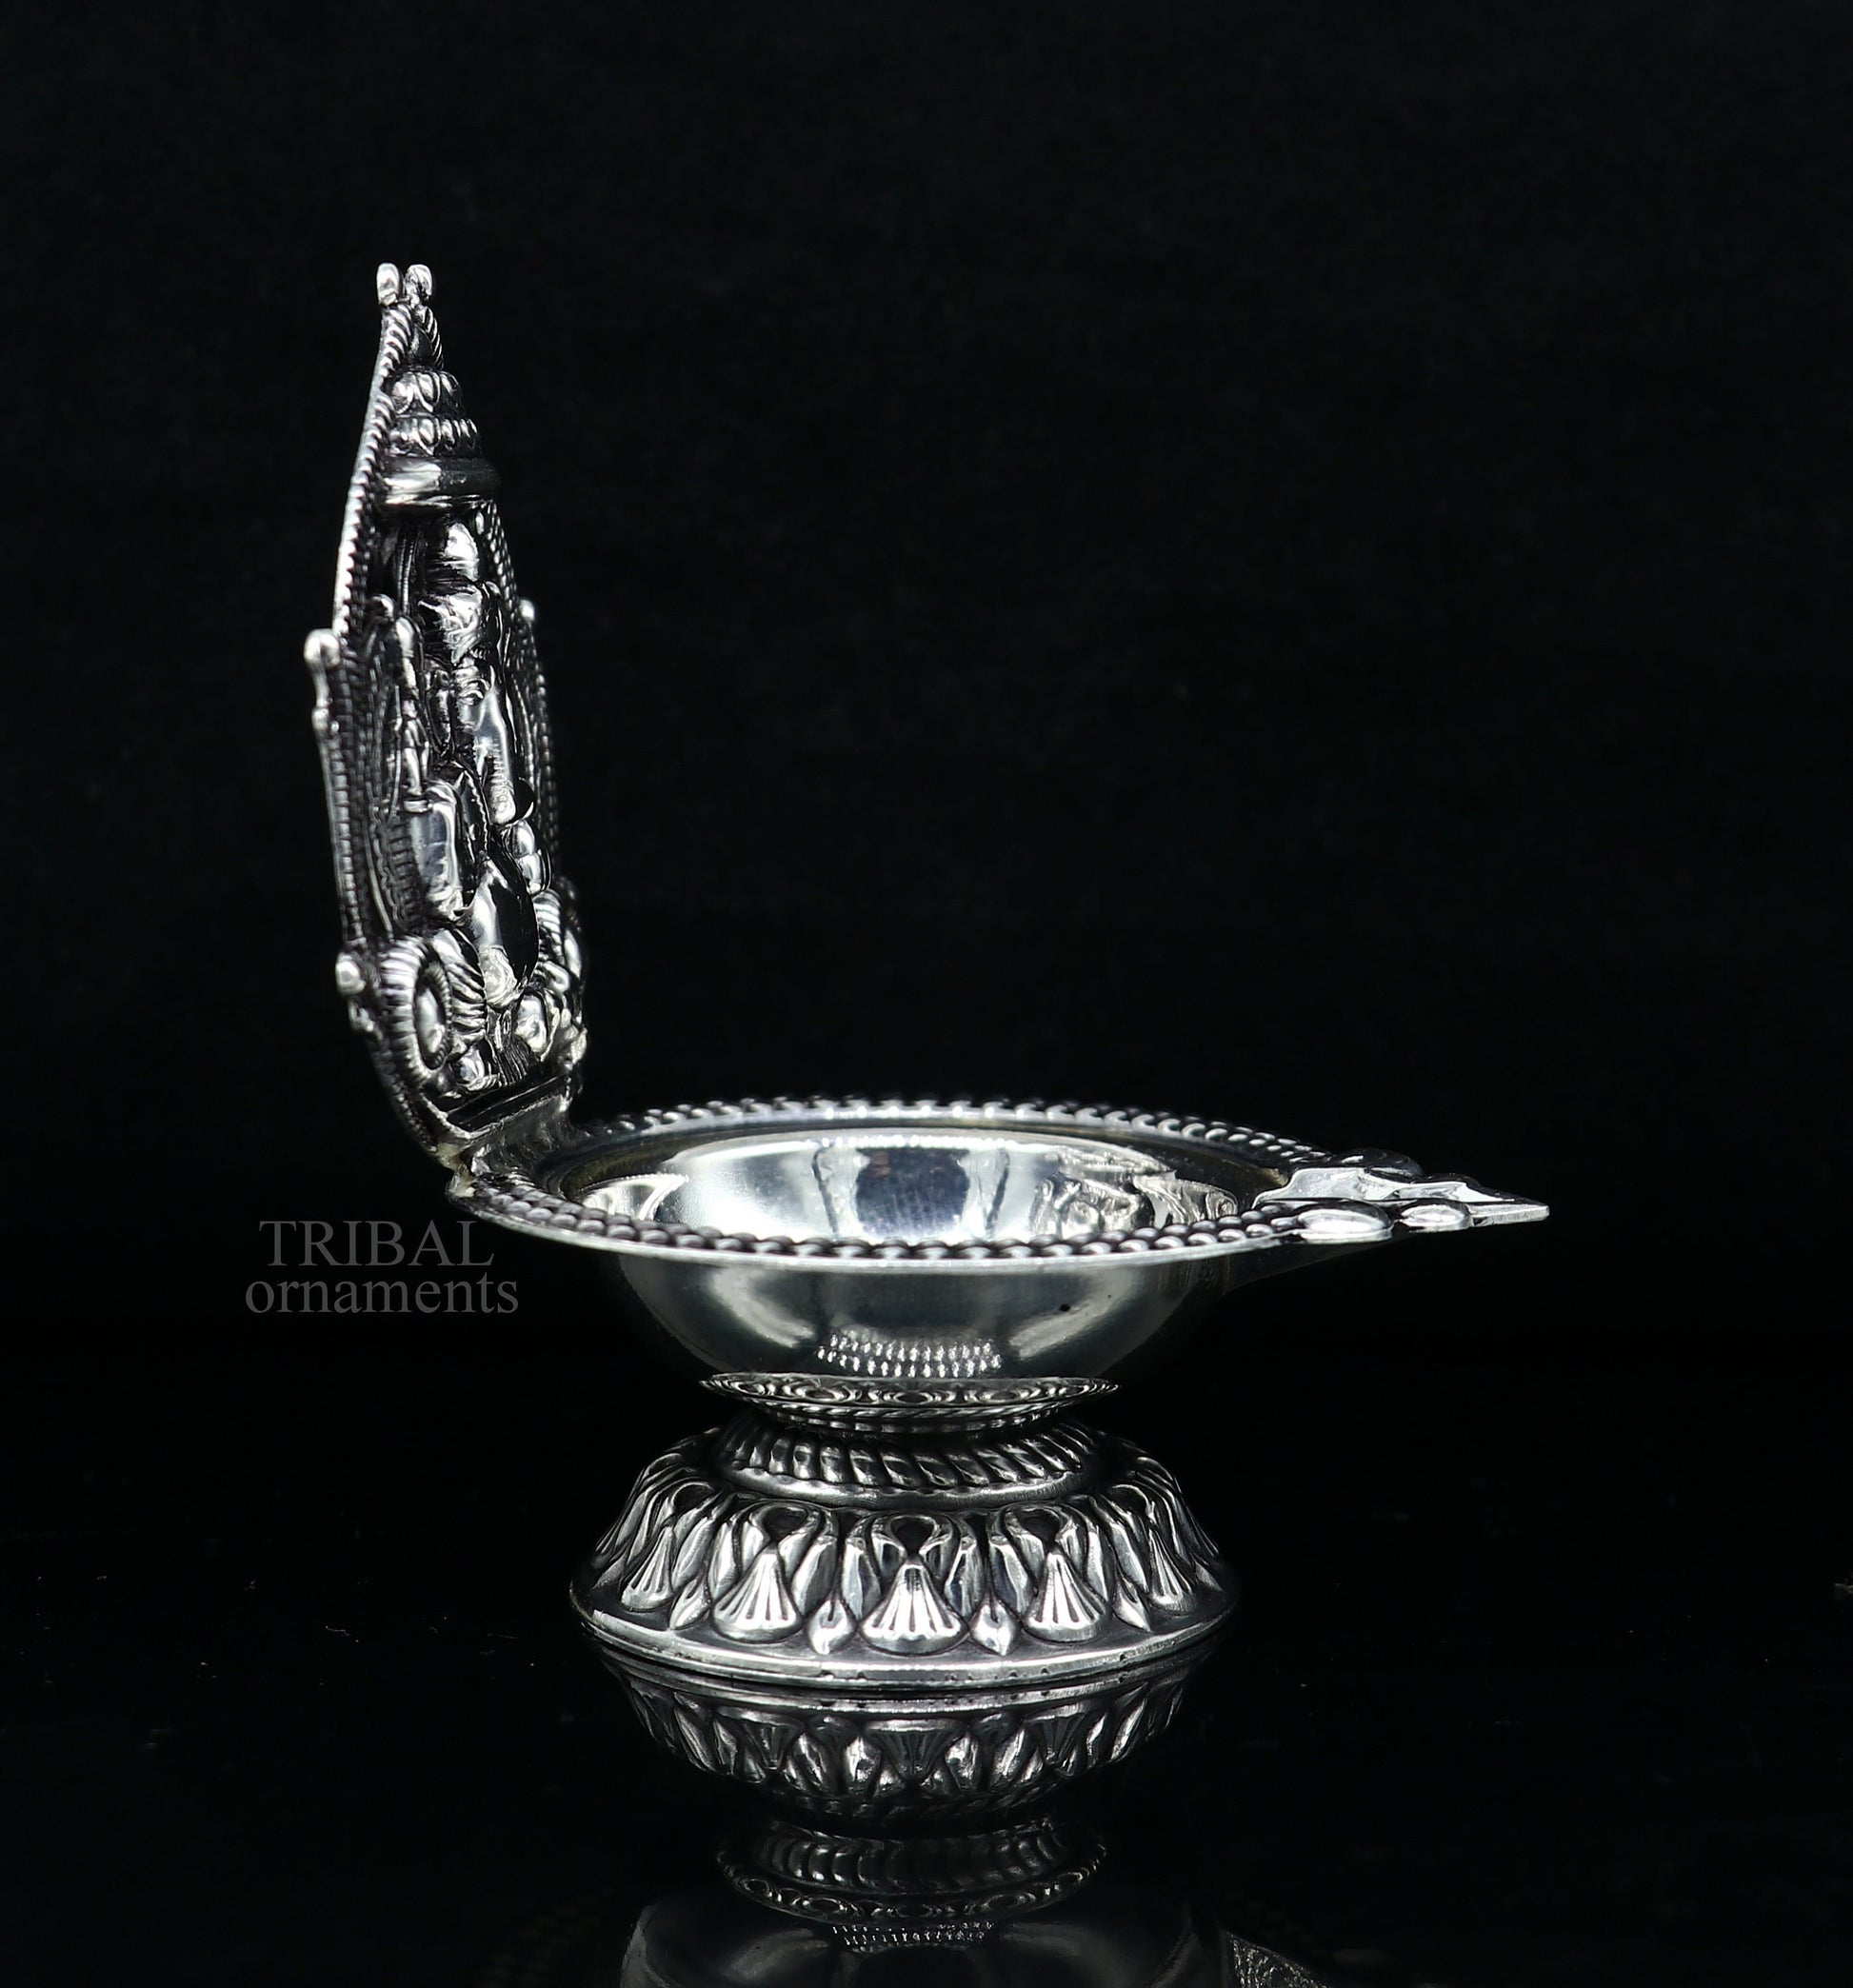 925 sterling silver vintage antique design lord Ganesha design oil lamp, excellent temple jewelry for home temple art from india su669 - TRIBAL ORNAMENTS